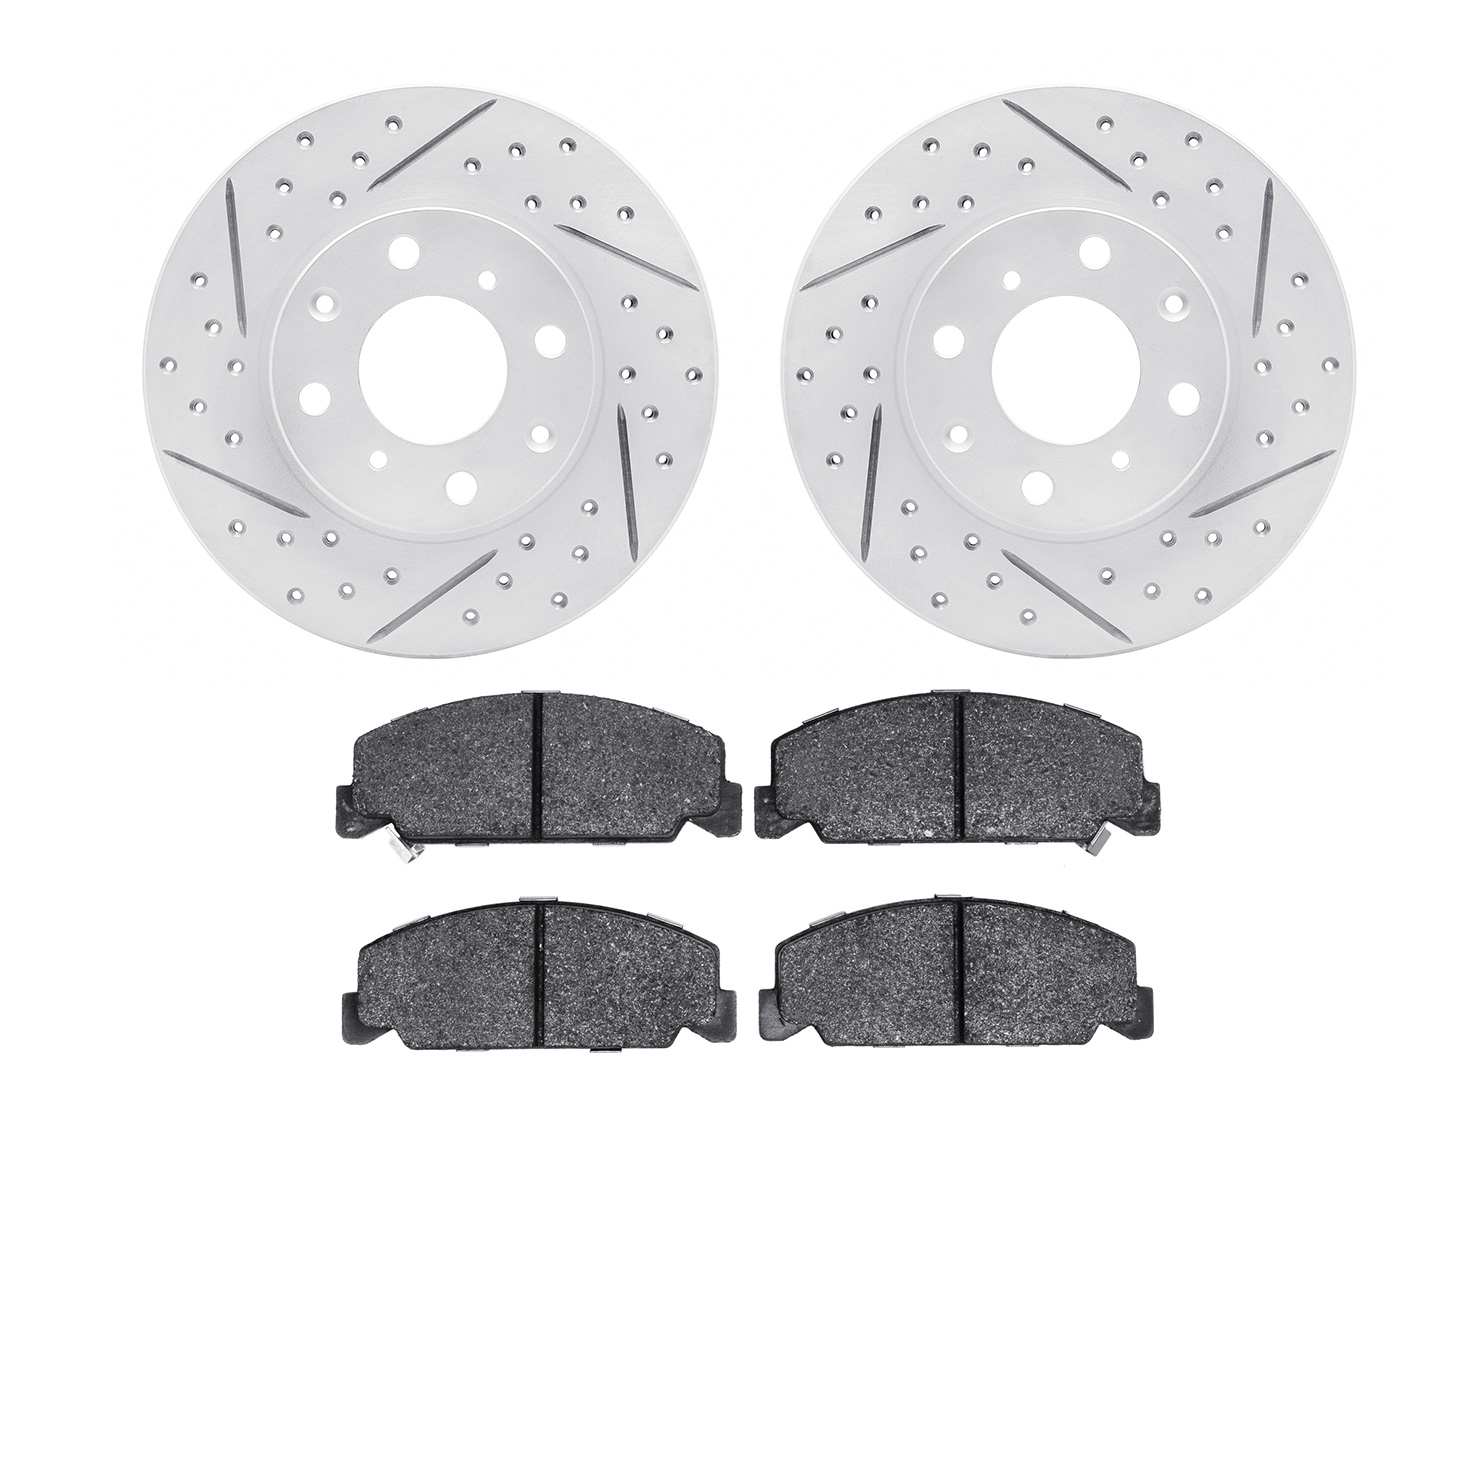 2502-59001 Geoperformance Drilled/Slotted Rotors w/5000 Advanced Brake Pads Kit, 1988-1989 Acura/Honda, Position: Front